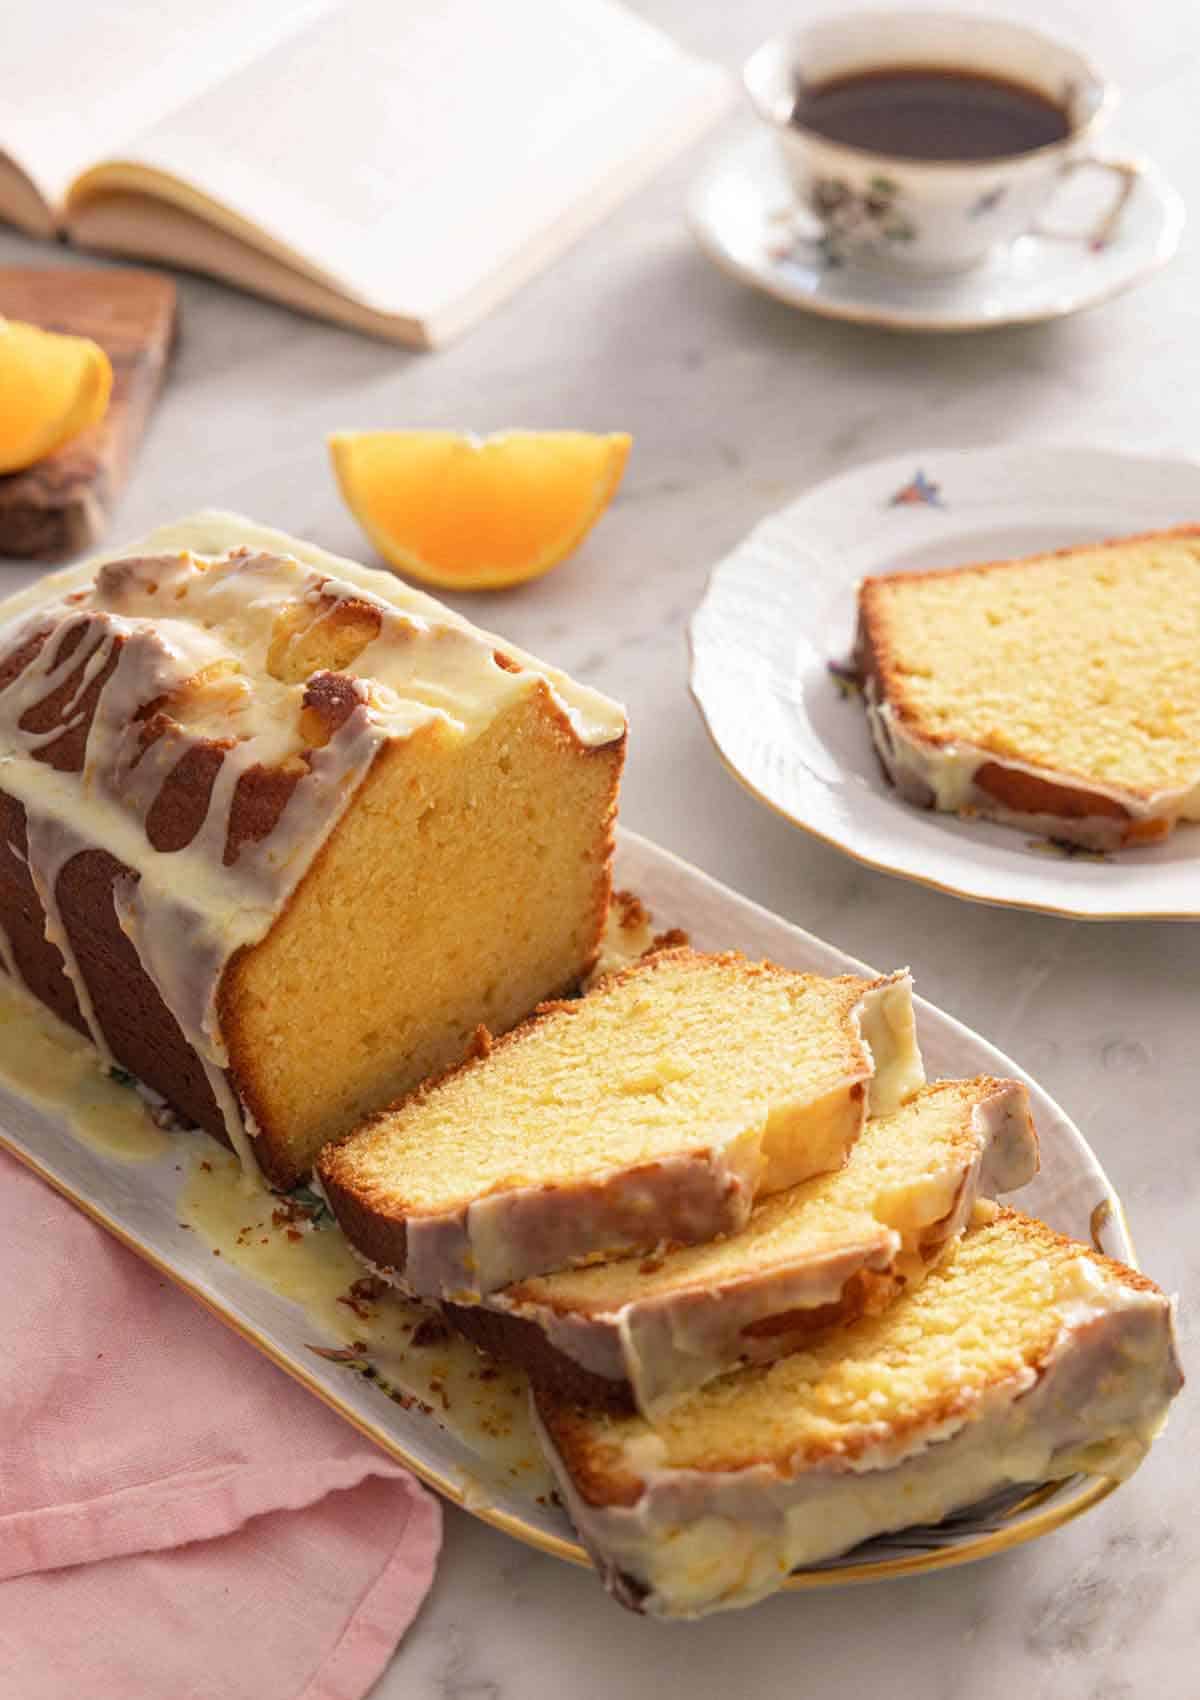 A loaf of orange cake with three slices cut by a mug of coffee and orange wedges.